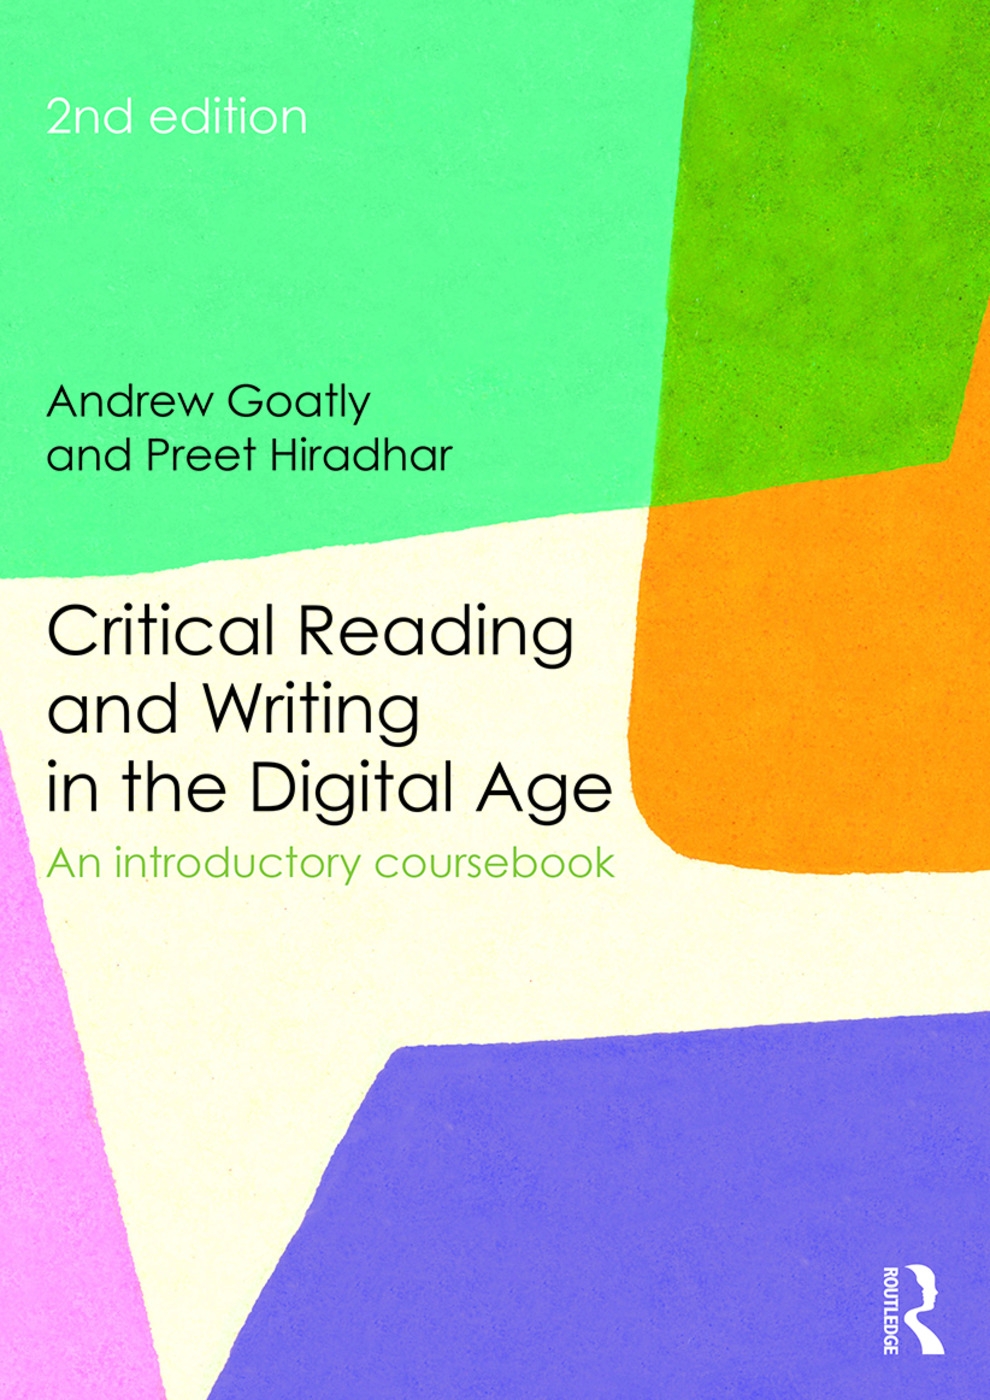 Critical Reading and Writing in the Digital Age: An introductory coursebook